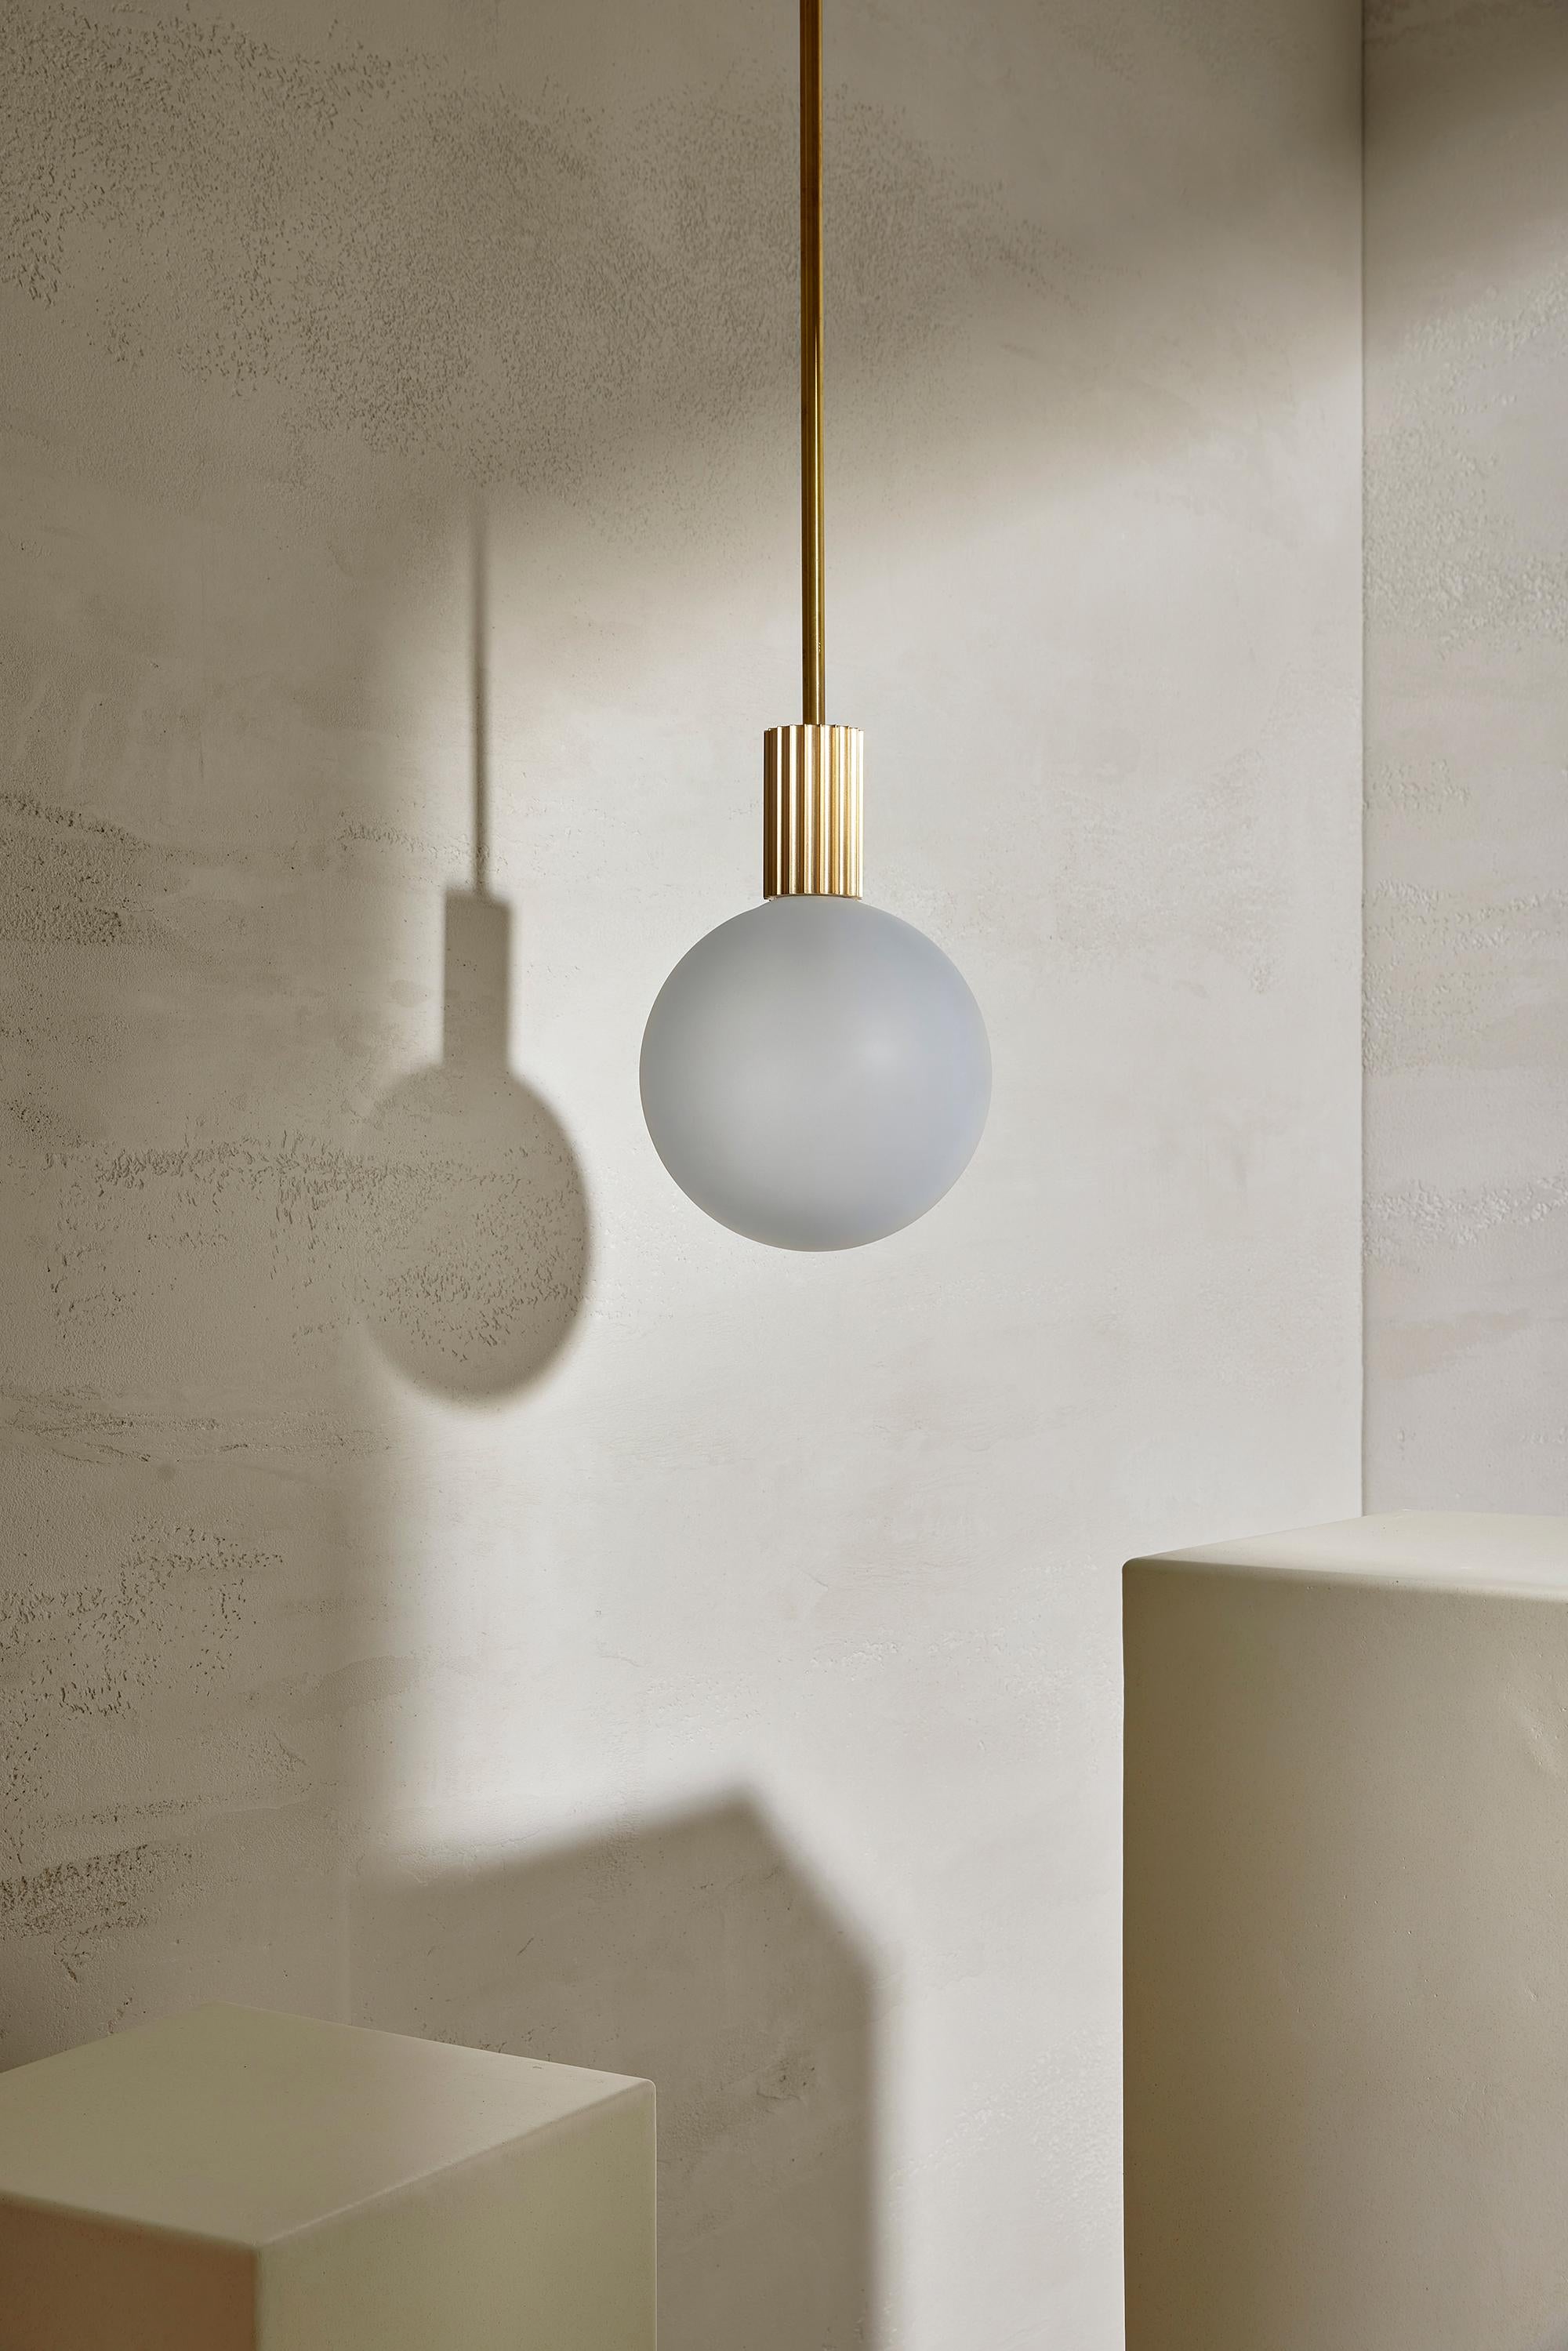 The Attalos Pendant Light, 200 is a classical and sculptural LED light. Part of the Attalos range, each piece is inspired by the fluted columns from the Stoa of Attalos, Athens and the Doric order. The Attalos Pendant Light features a delicate